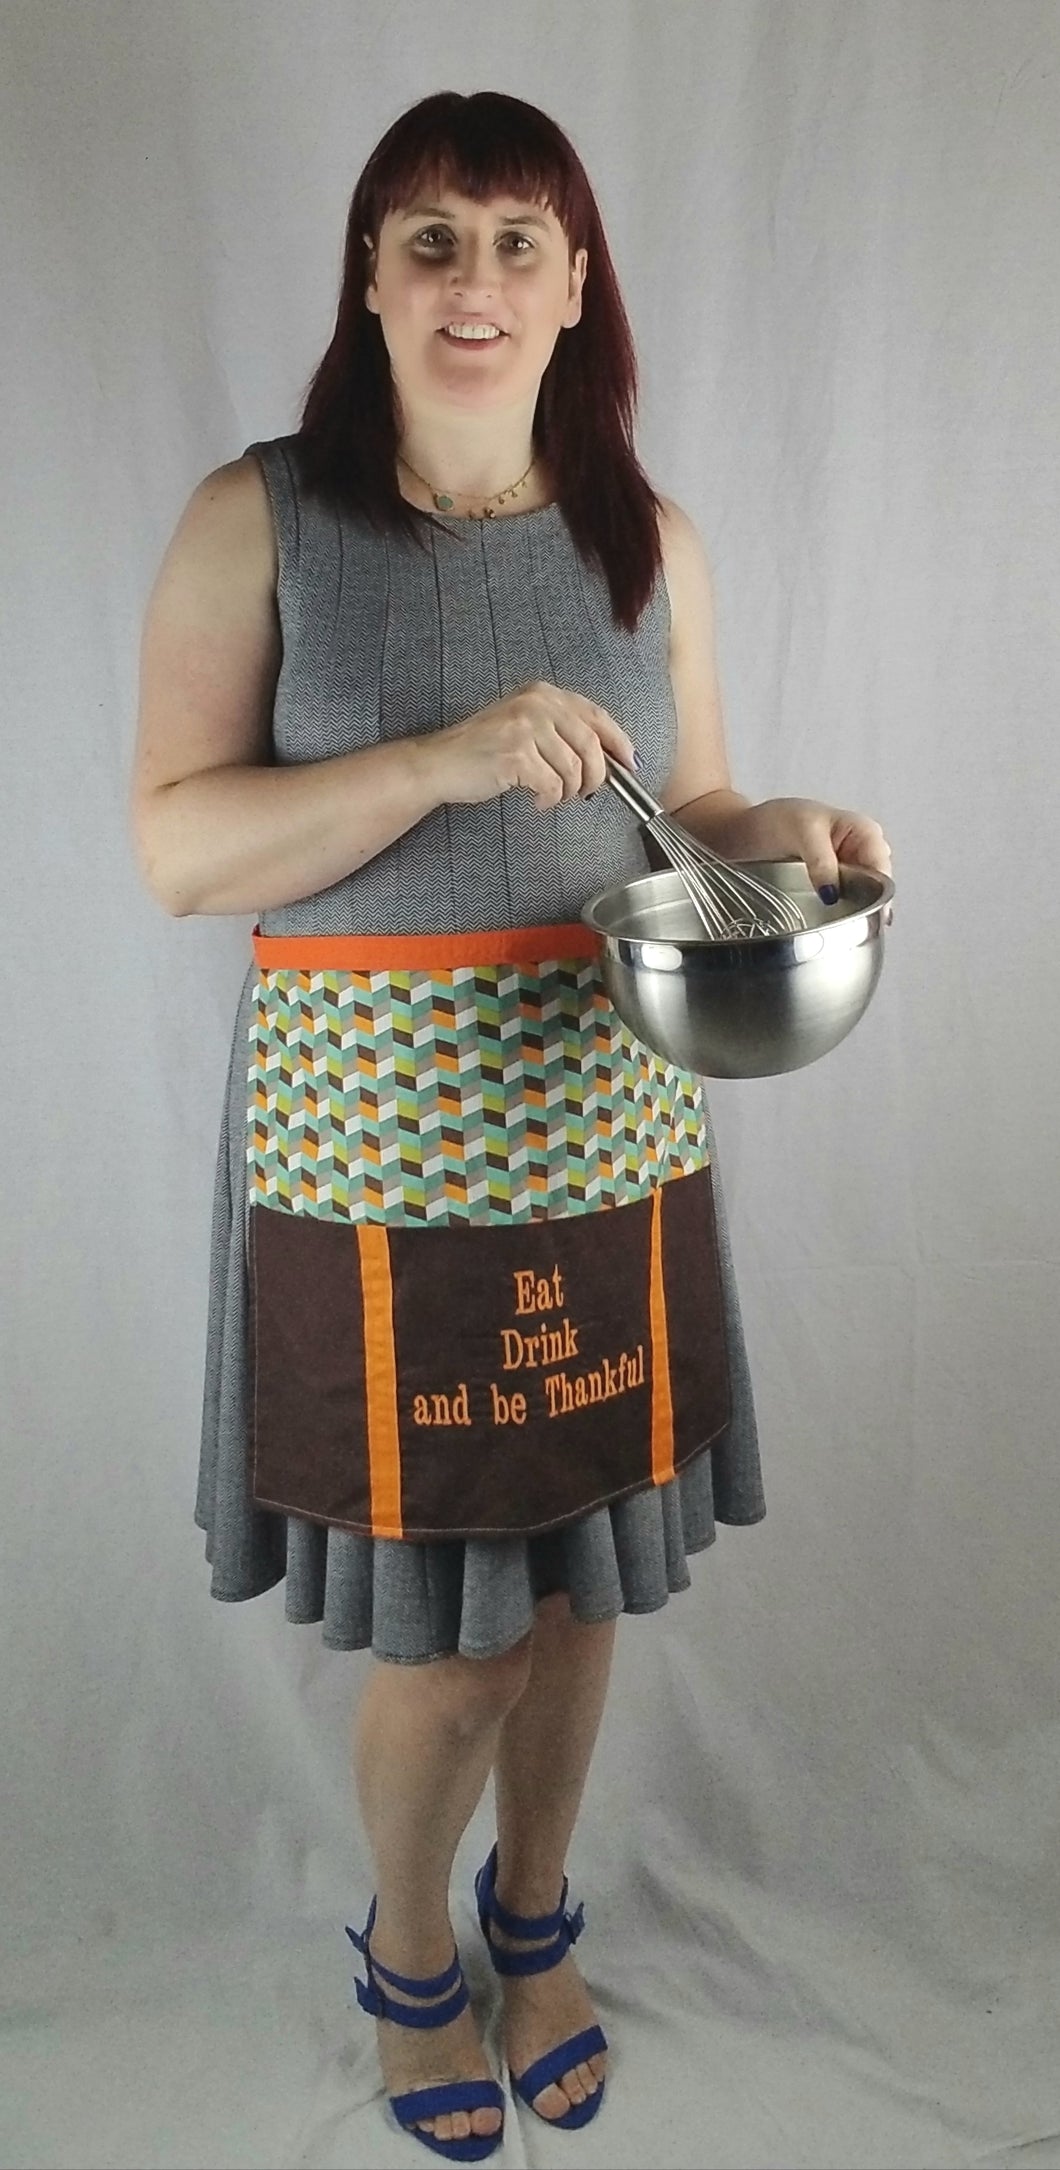 Eat, Drink and be Thankful - Half Apron